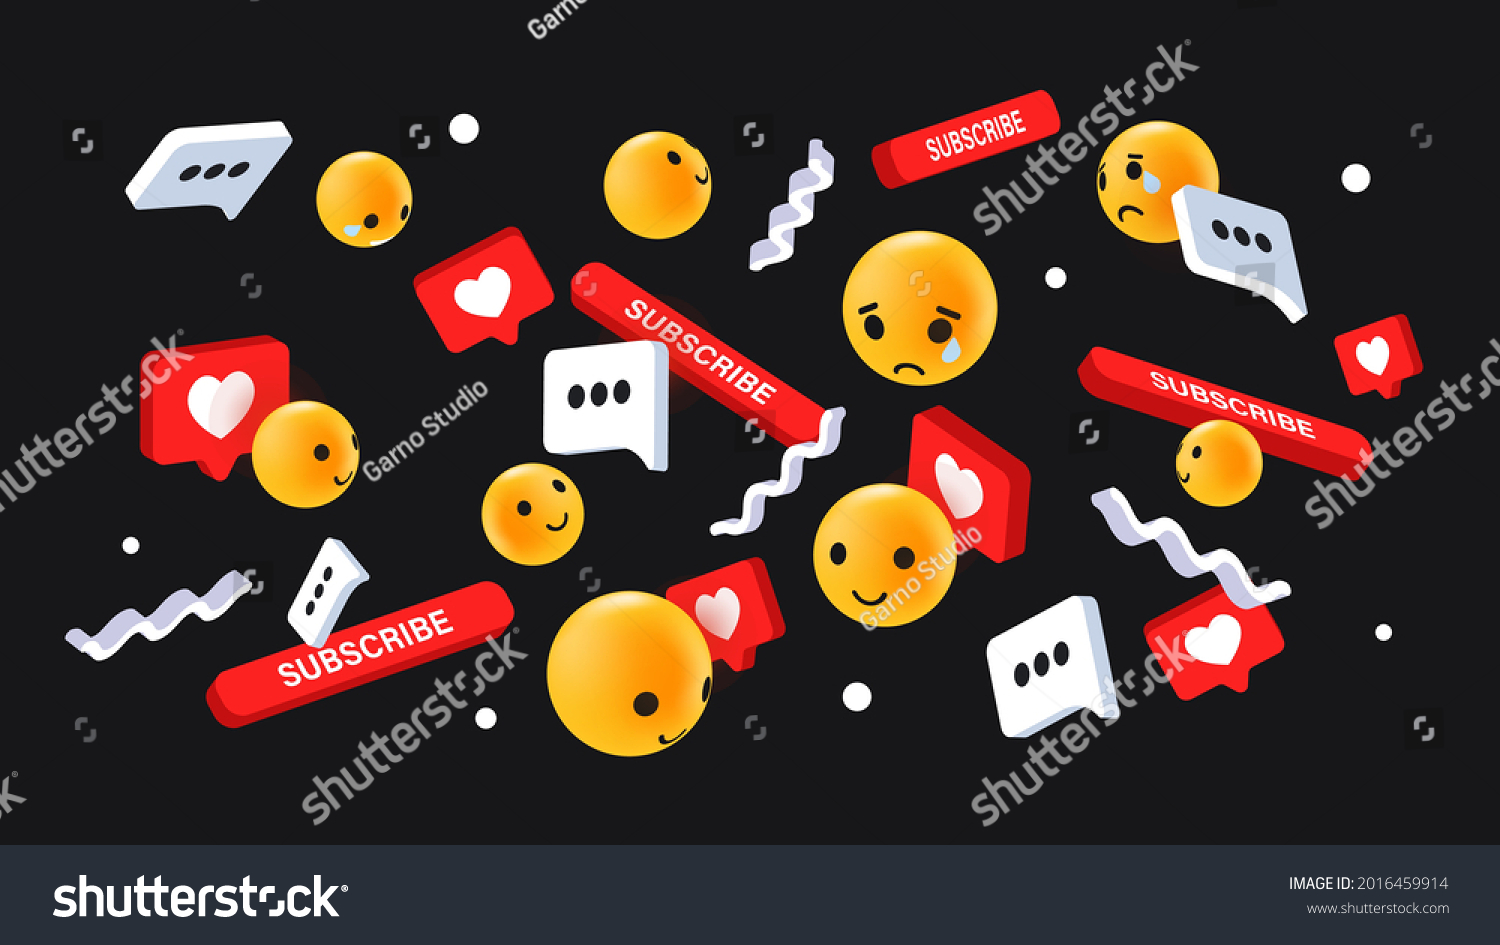 SVG of Social Media Emoji Reactions Concept. Flying Emoticons, Like, Emoji Faces, Hearts, Comment and Subscribe Button on Dark Background. Vector illustration svg